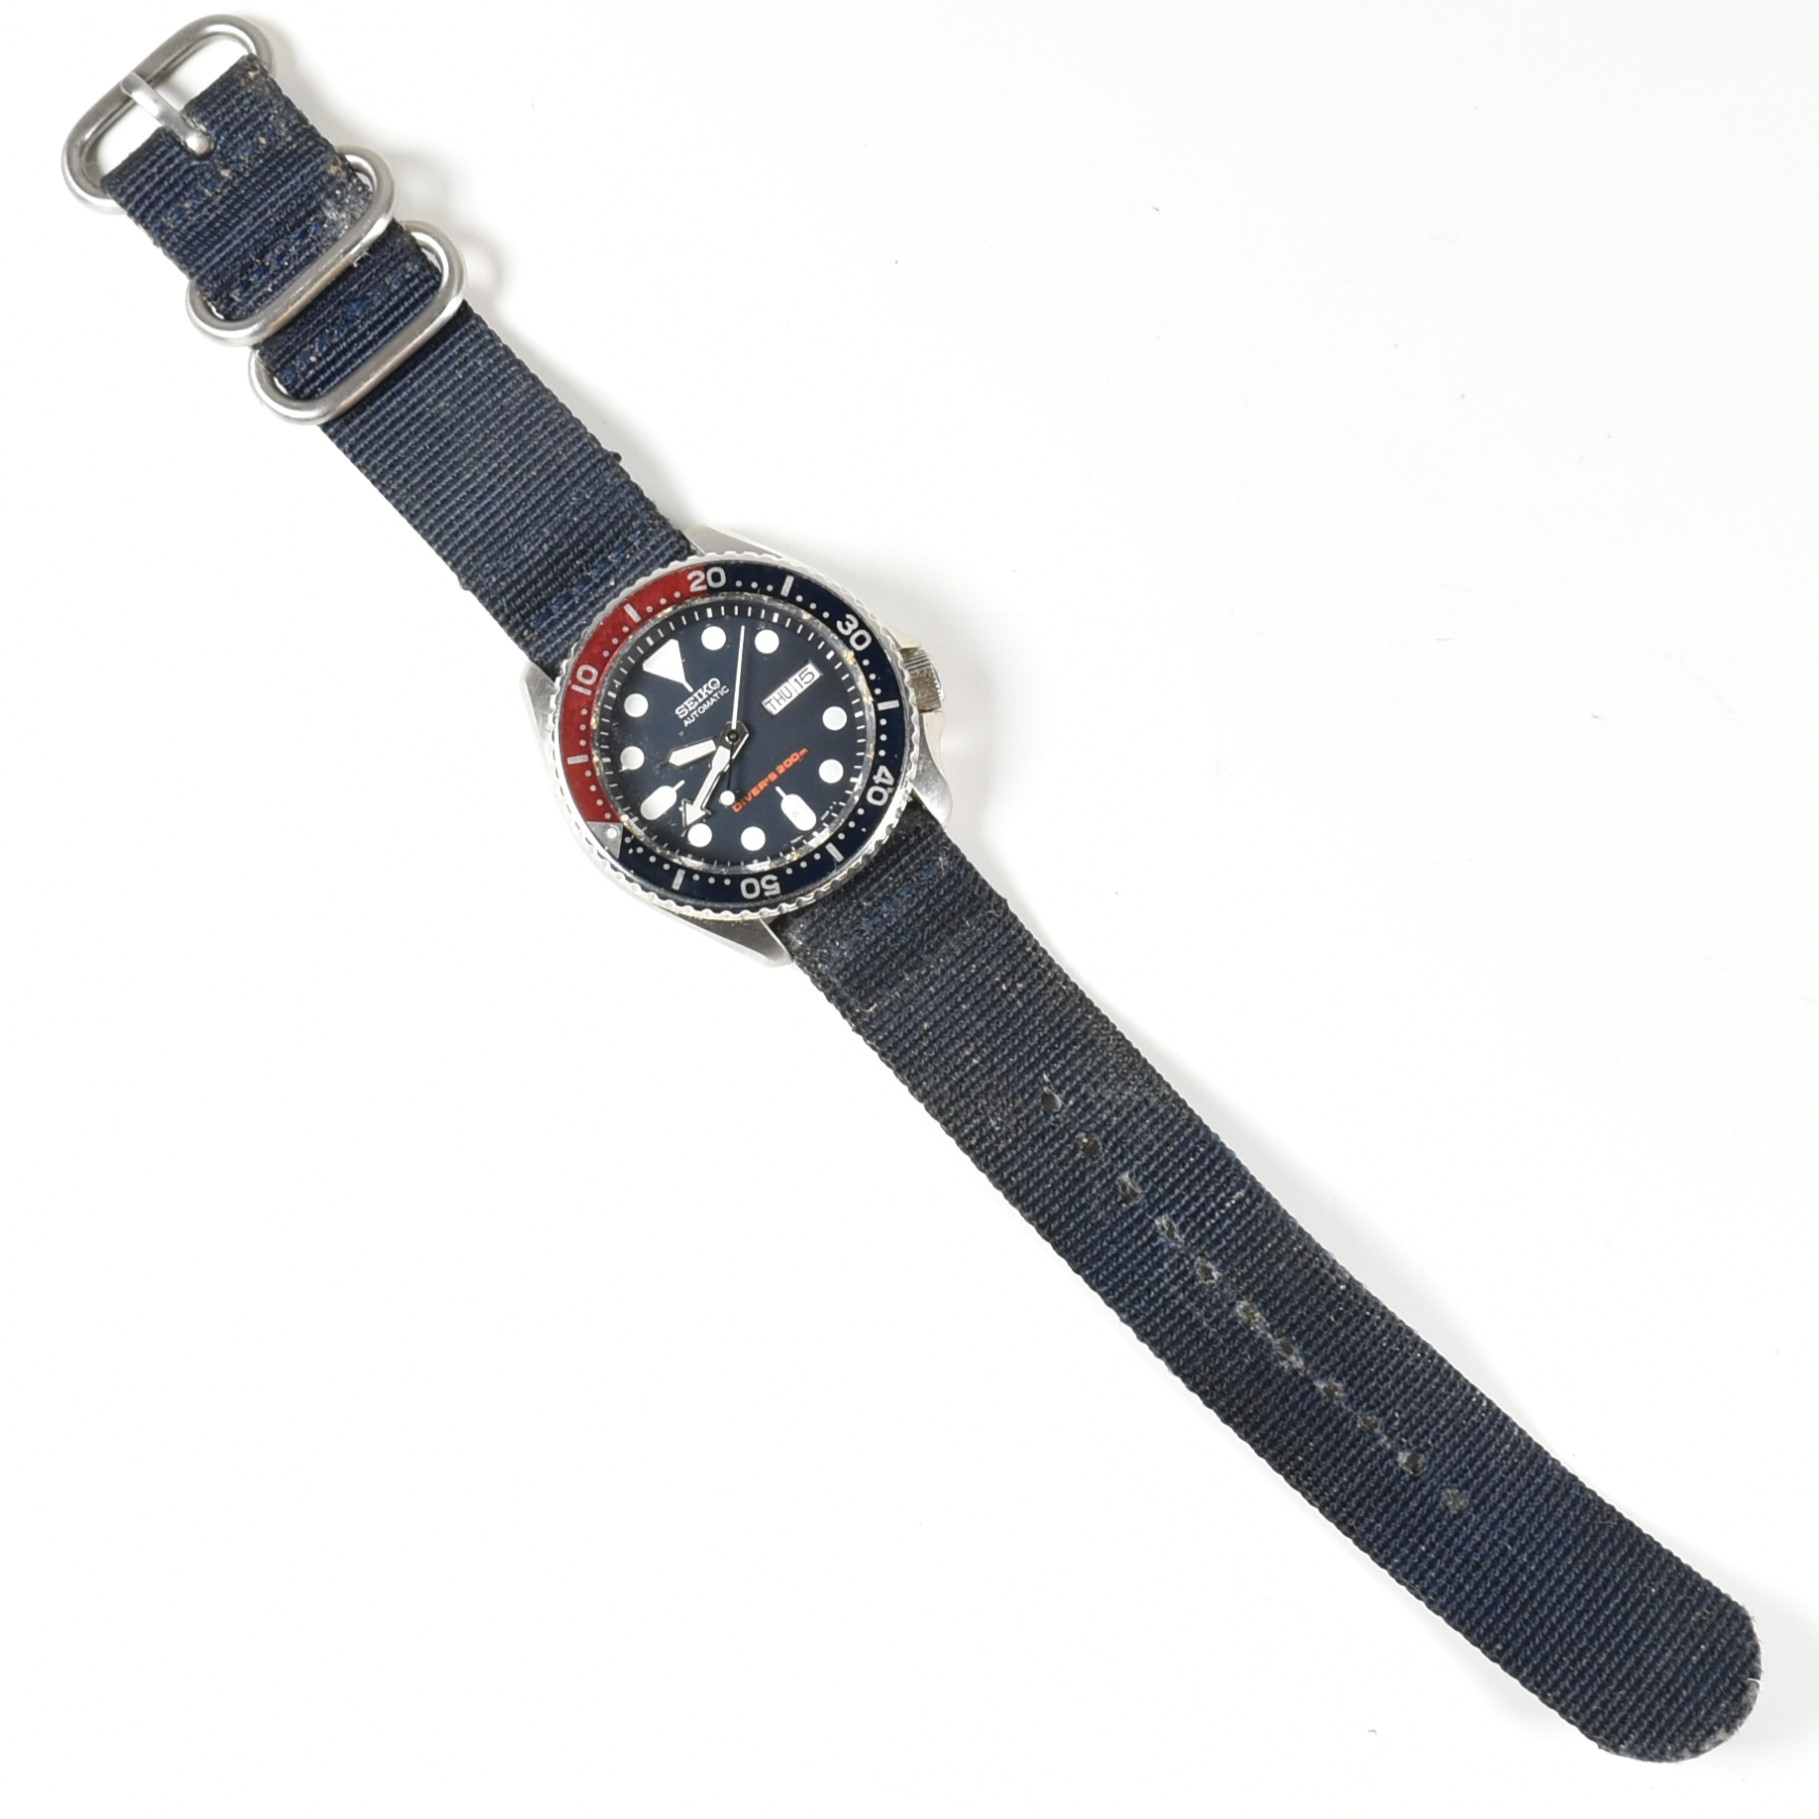 SEIKO AUTOMATIC DIVERS WRISTWATCH - Image 4 of 6